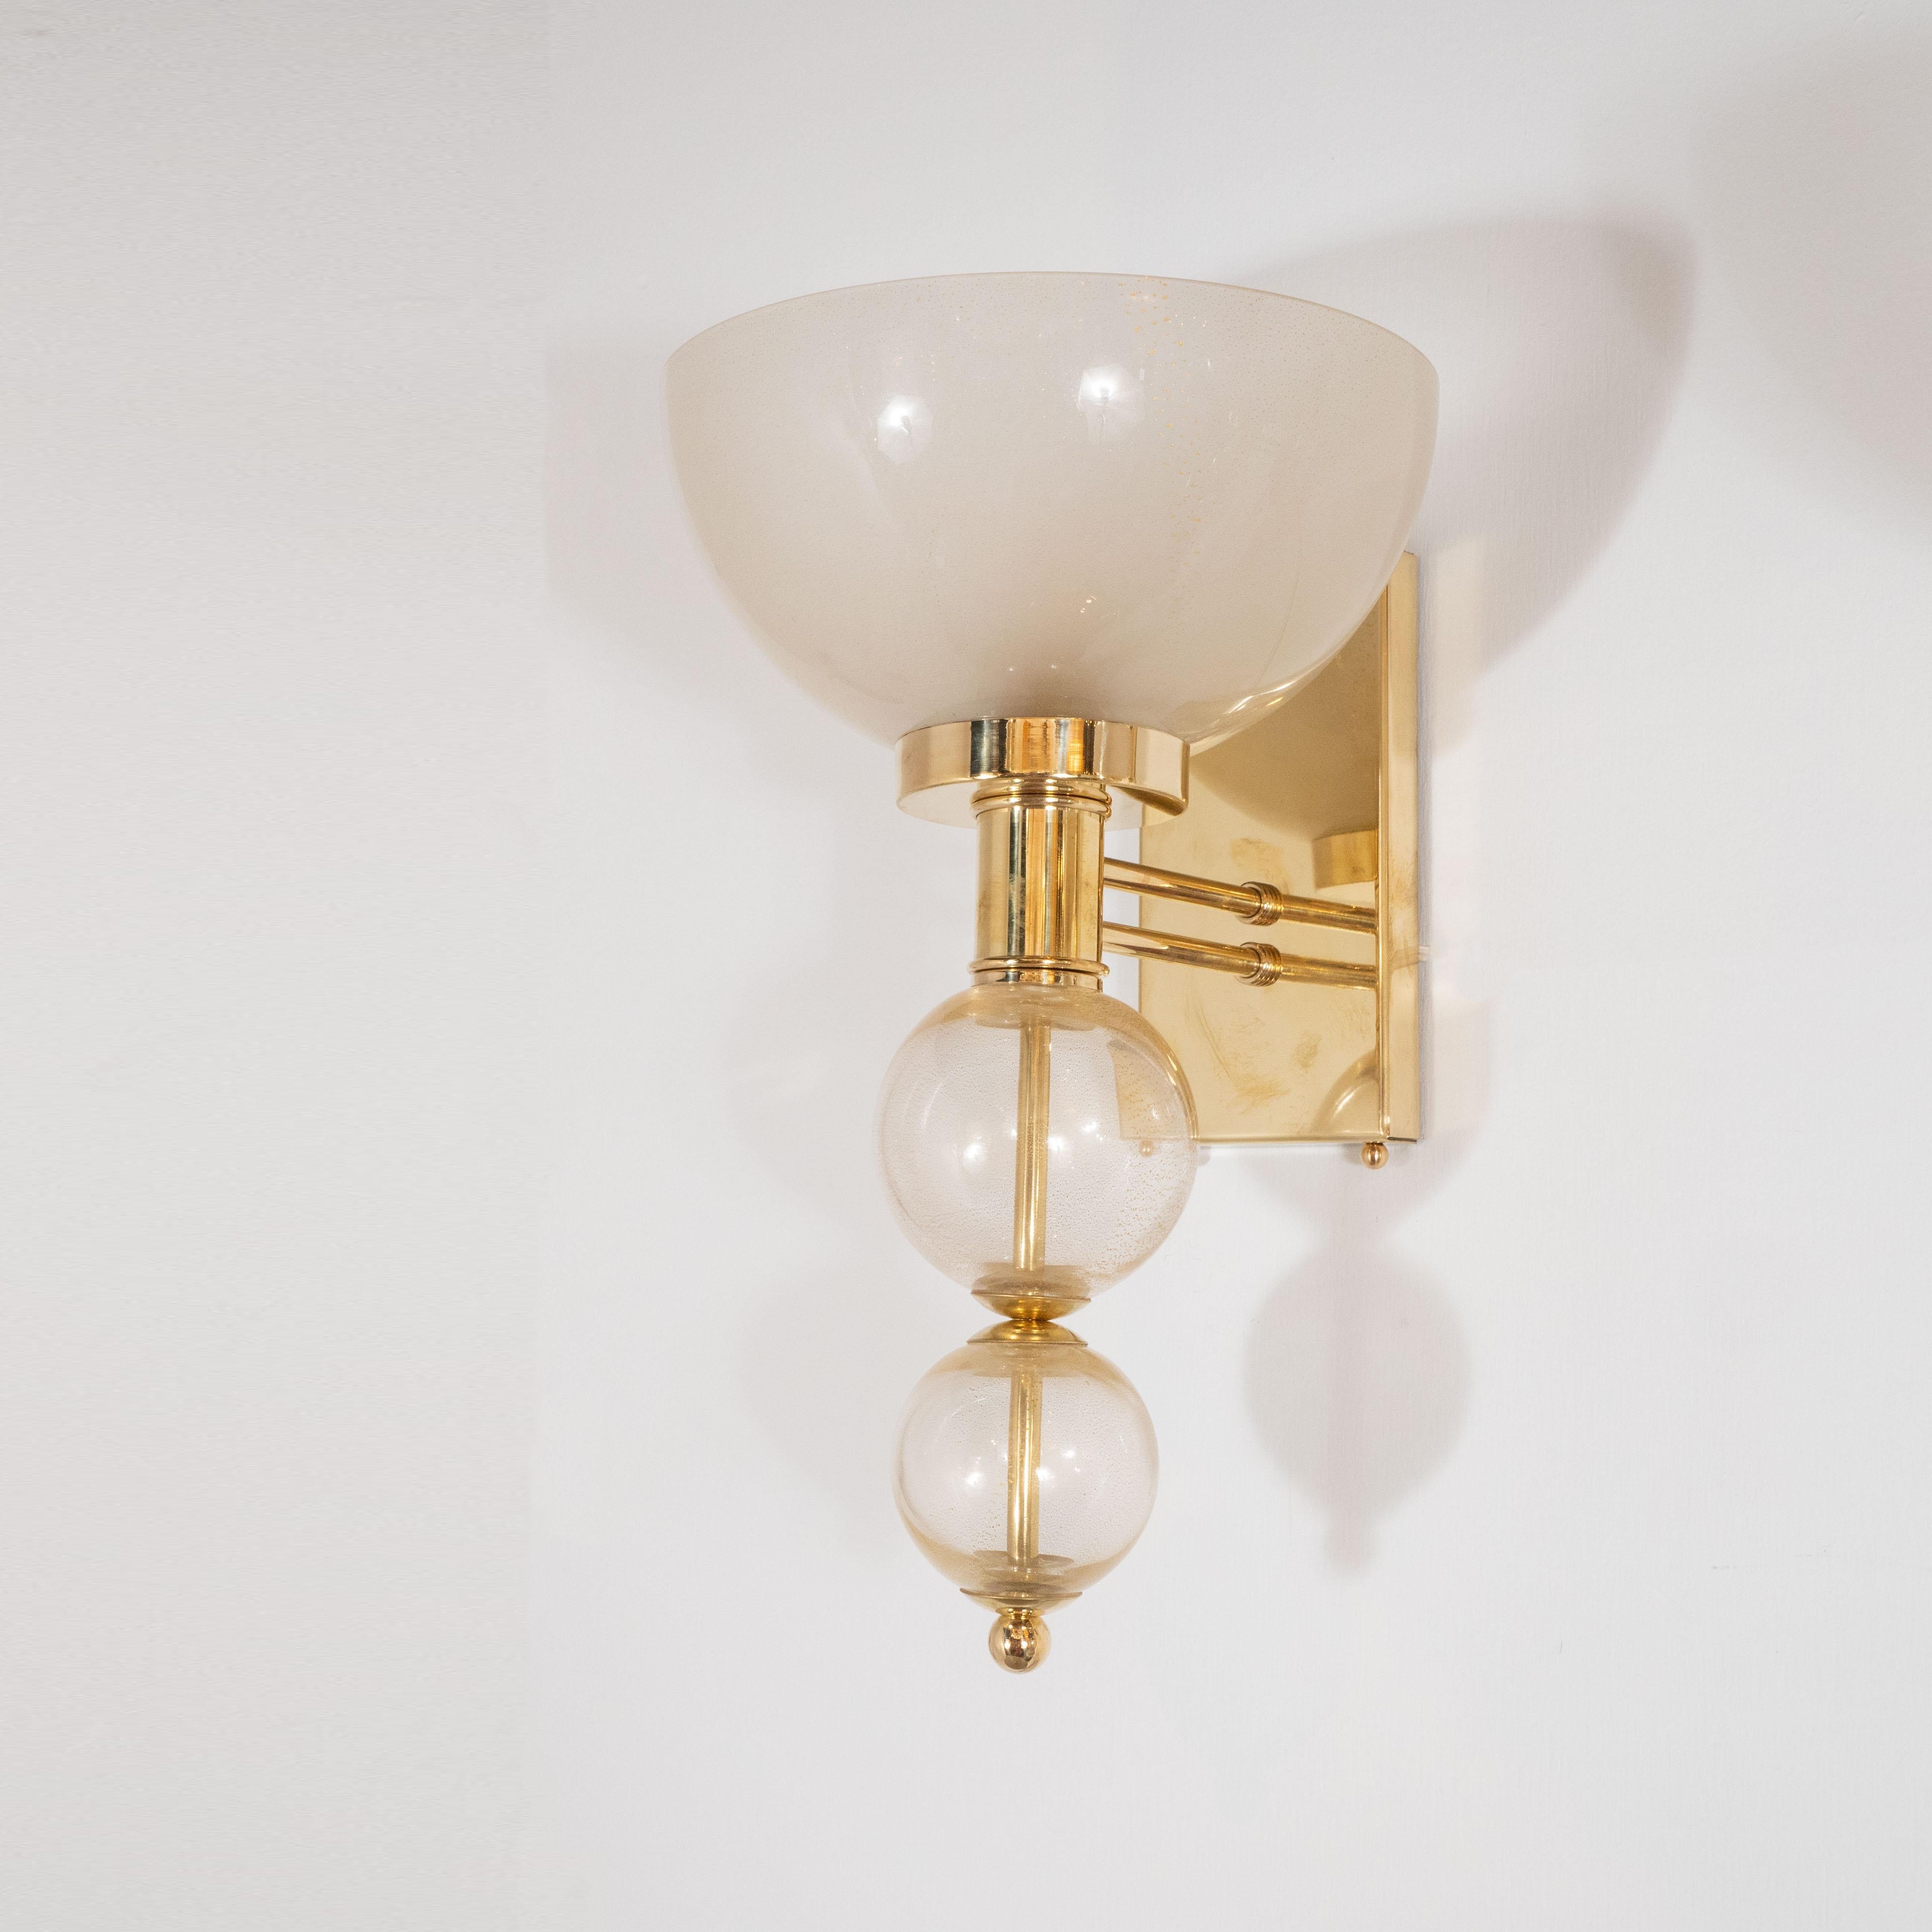 Pair of hand blown murano glass sconces consisting of an ivory glass cup sitting atop two gold spheres. Glass elements are separated by polished brass fittings. Sconces are suspended by brass rods and attach to wall by a brass wall plate. Wired for